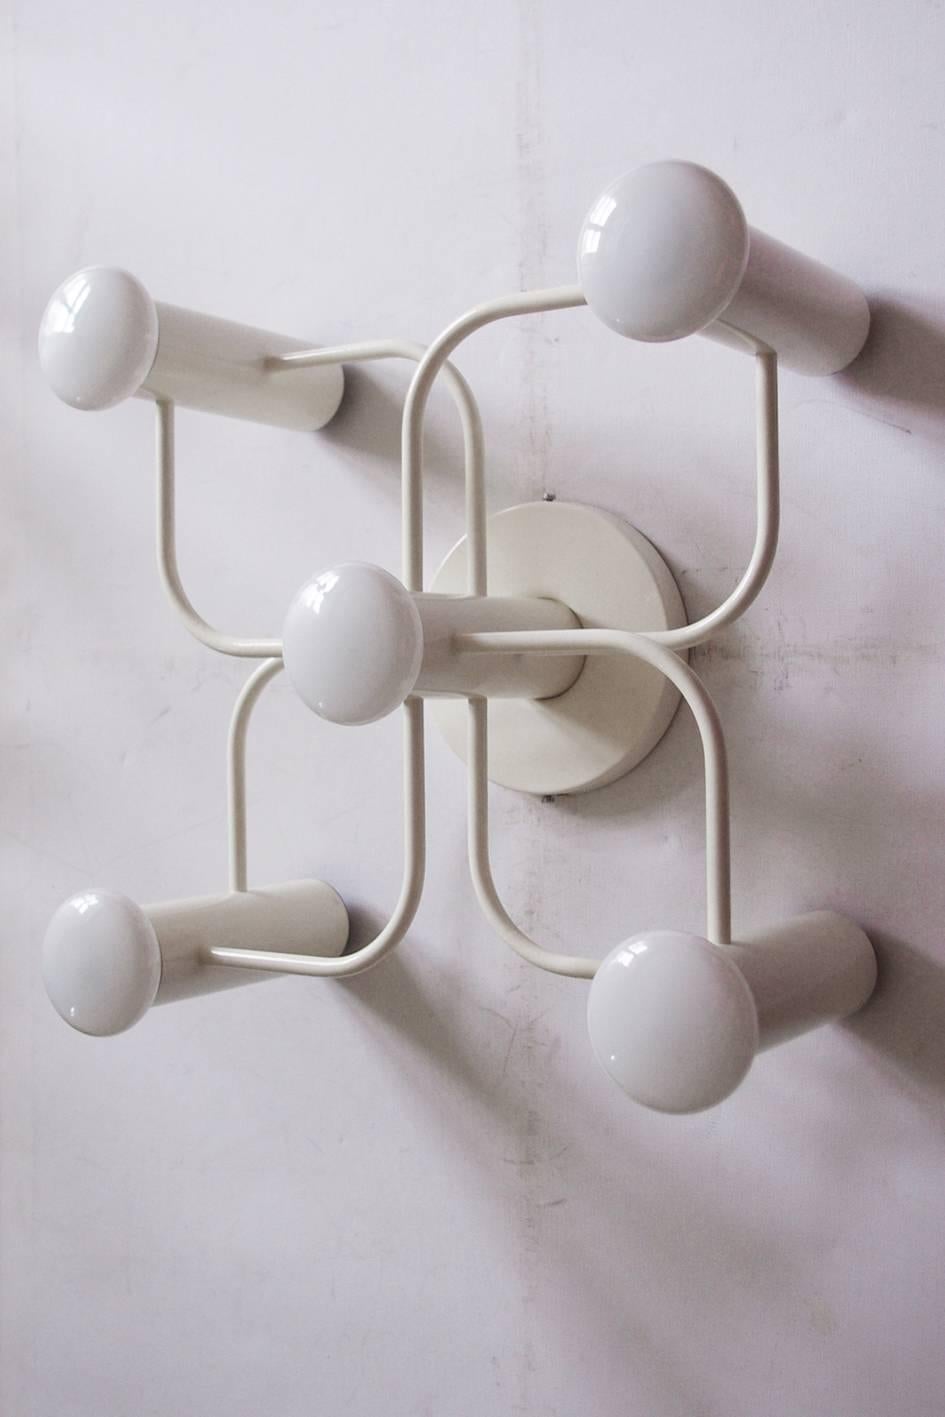 Beautiful sculptural Sciolari style ceiling or wall flush mount by Leola,
Germany, 1960s.
White lacquered version! 
Measures: Height 13.8 in, width 13.8 in, depth 7 in.
Other versions and models available (brushed brass, white lacquered, polished